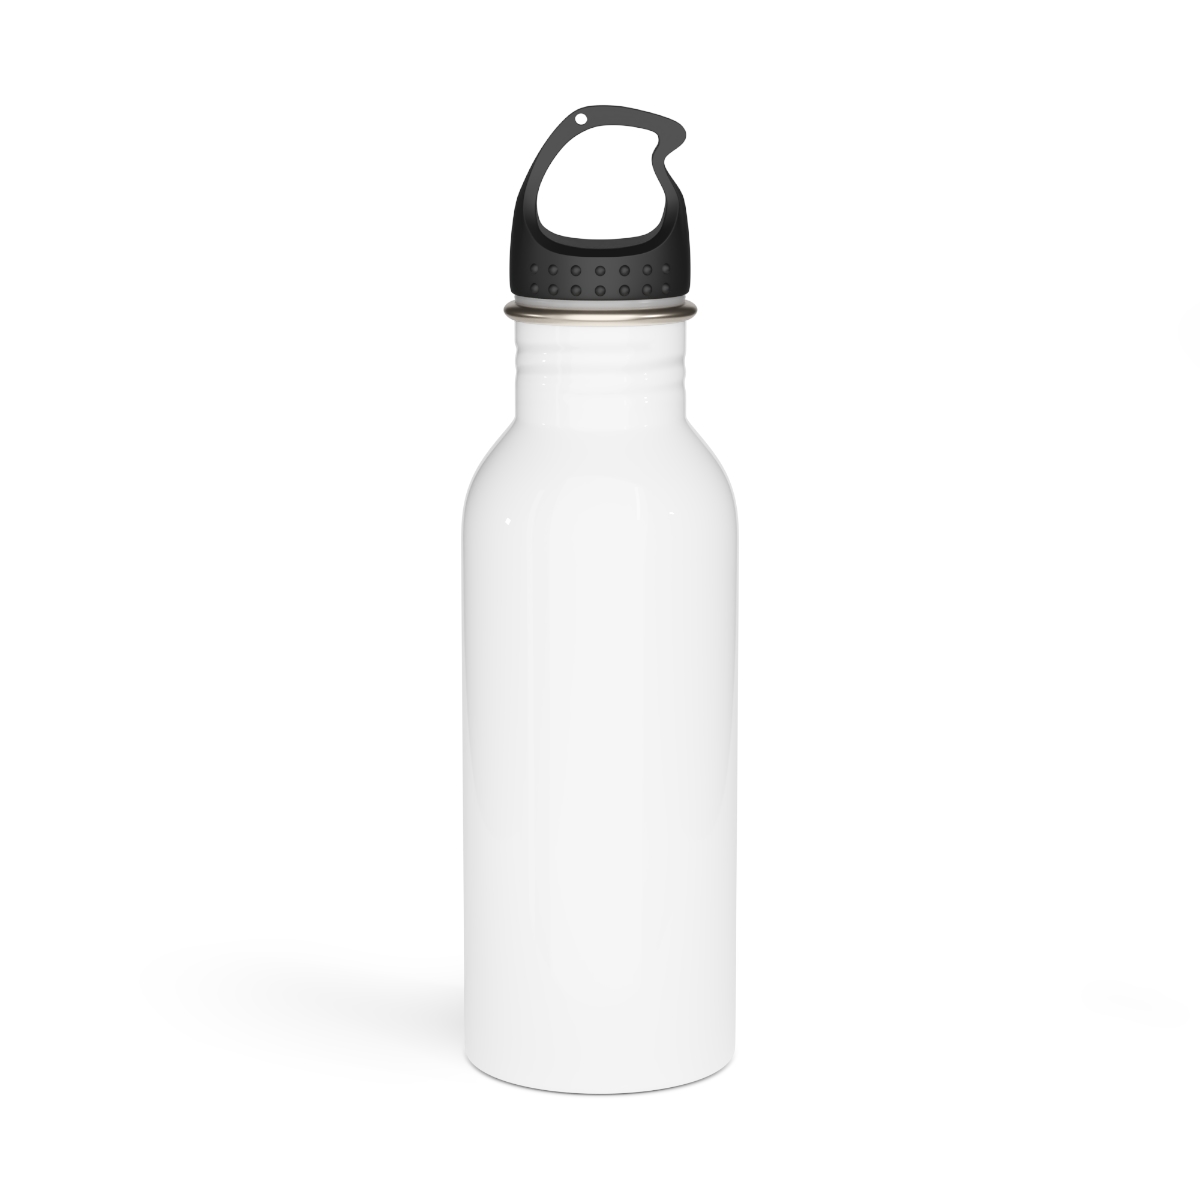 Game Underground Stainless Steel Water Bottle product thumbnail image